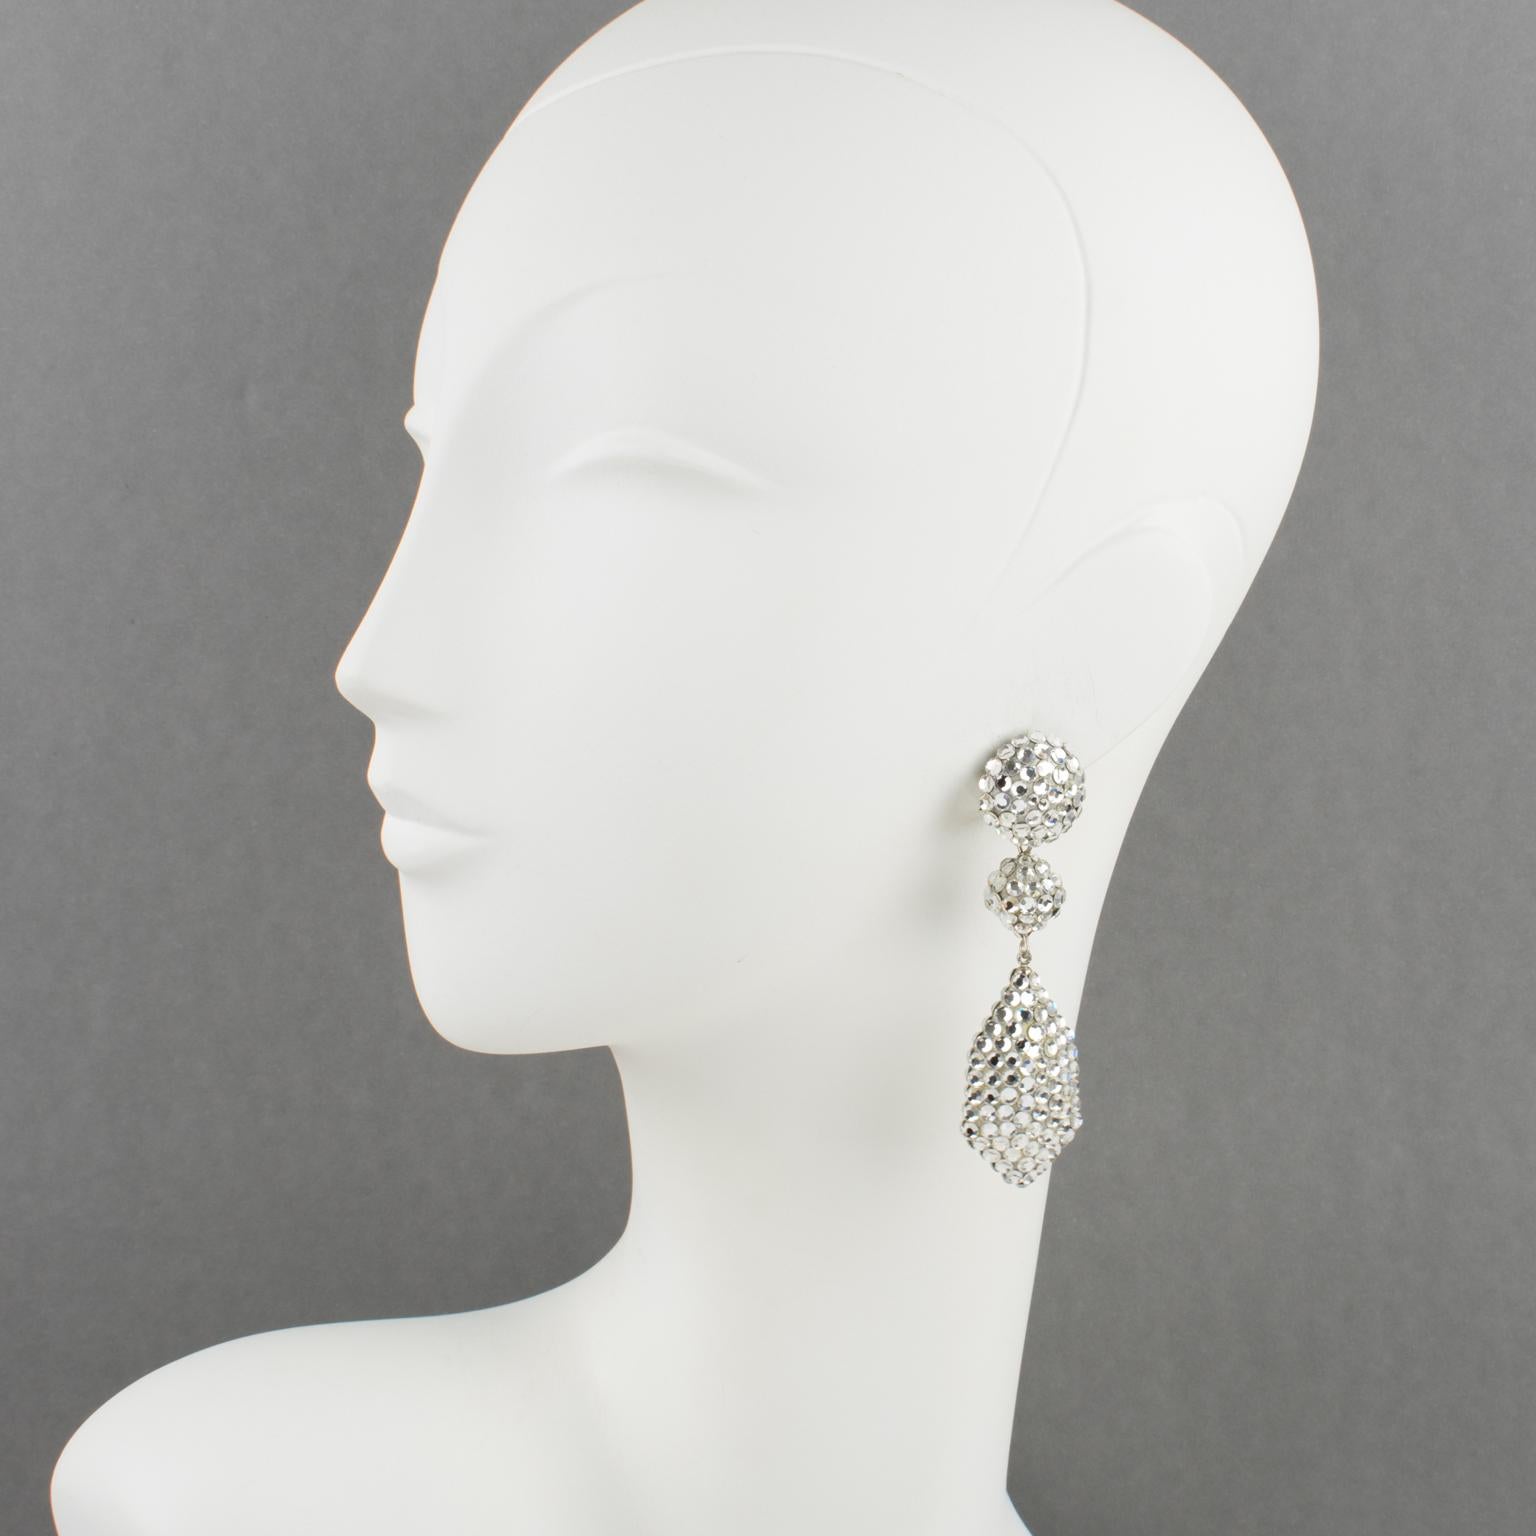 Richard Kerr designed these gorgeous statement clip-on earrings in the 1980s. They are composed of his emblematic pavé rhinestones and feature dangling geometric shapes, all covered with silver crystal rhinestones on a cream-custard resin background